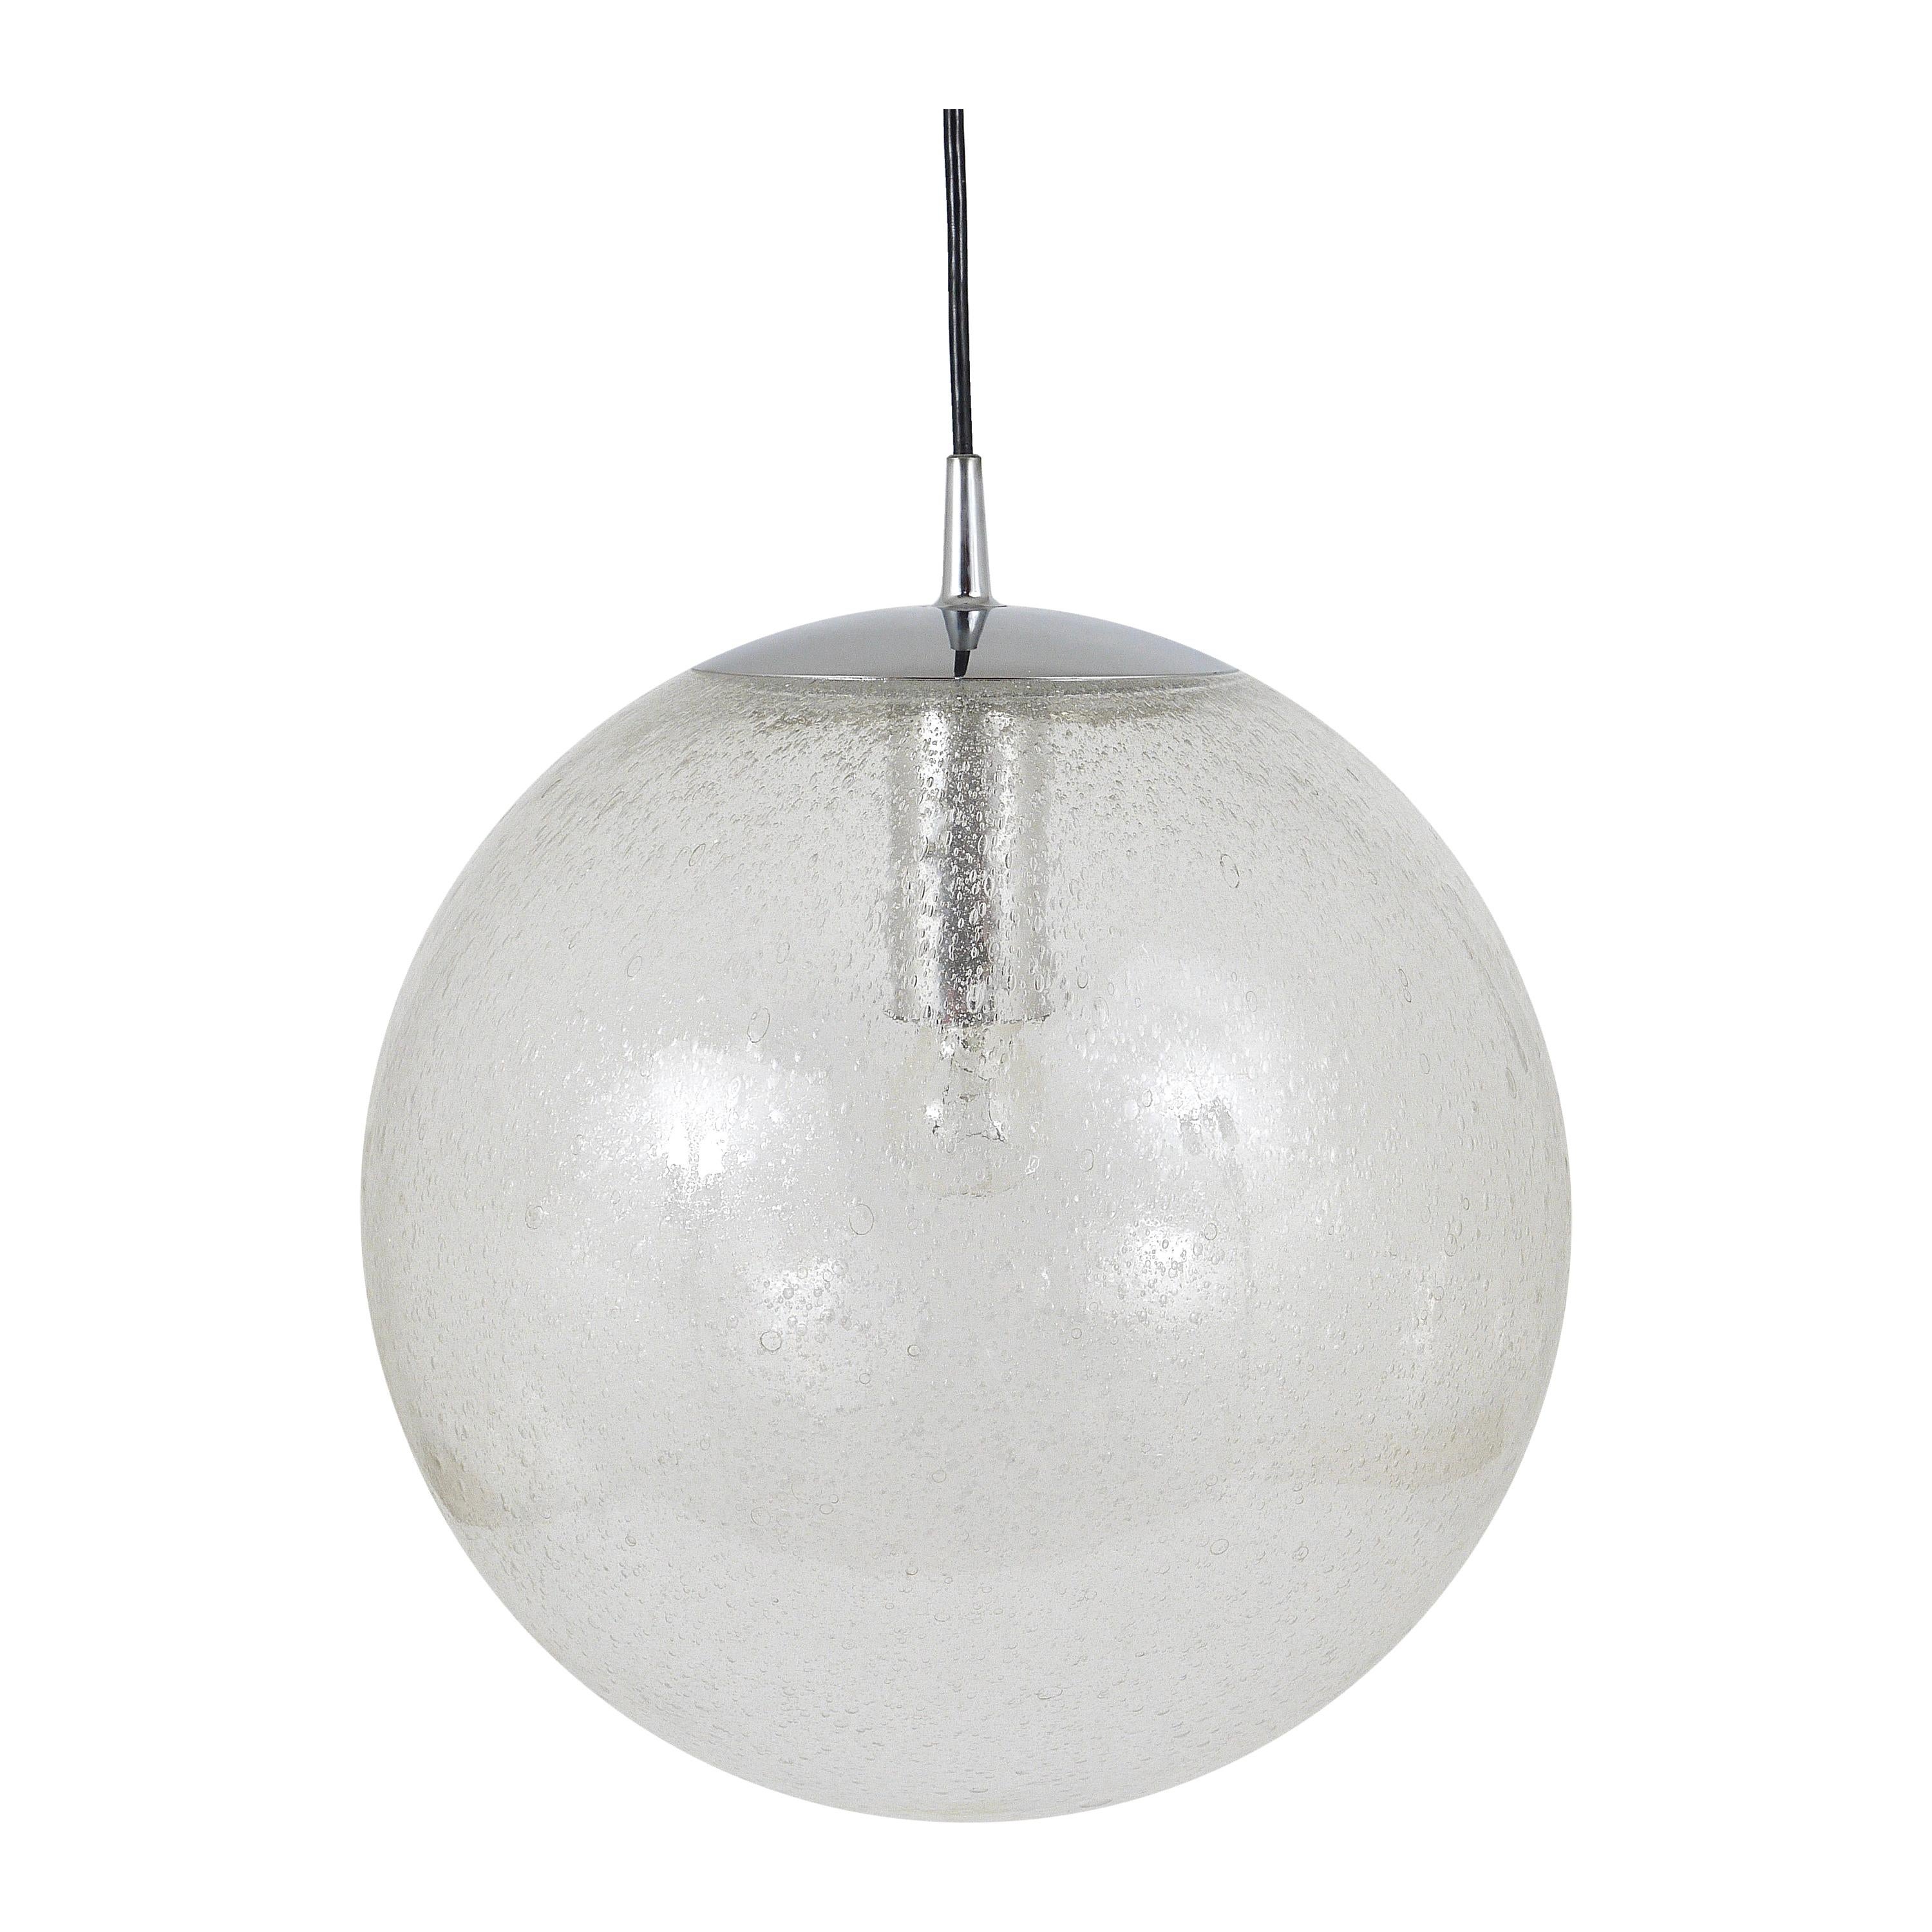 Large Peil & Putzler Bubble Glass and Chrome Globe Pendant Lamp, Germany, 1970s For Sale